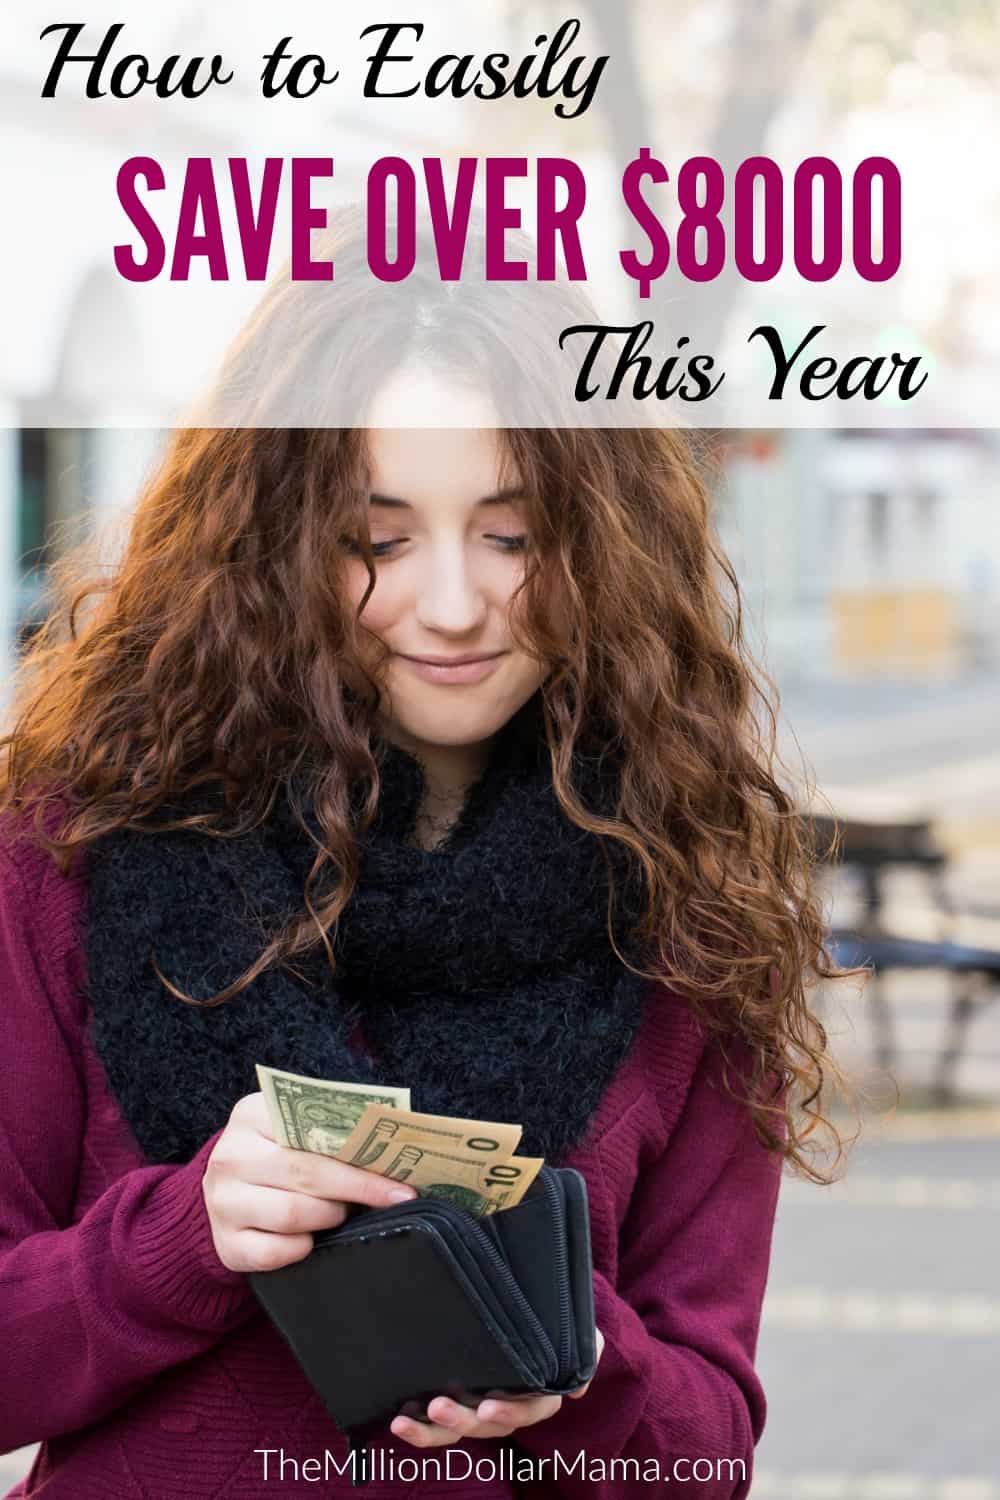 How to easily save money this year. These easy money-saving tips and ideas will help you save thousands of dollars!